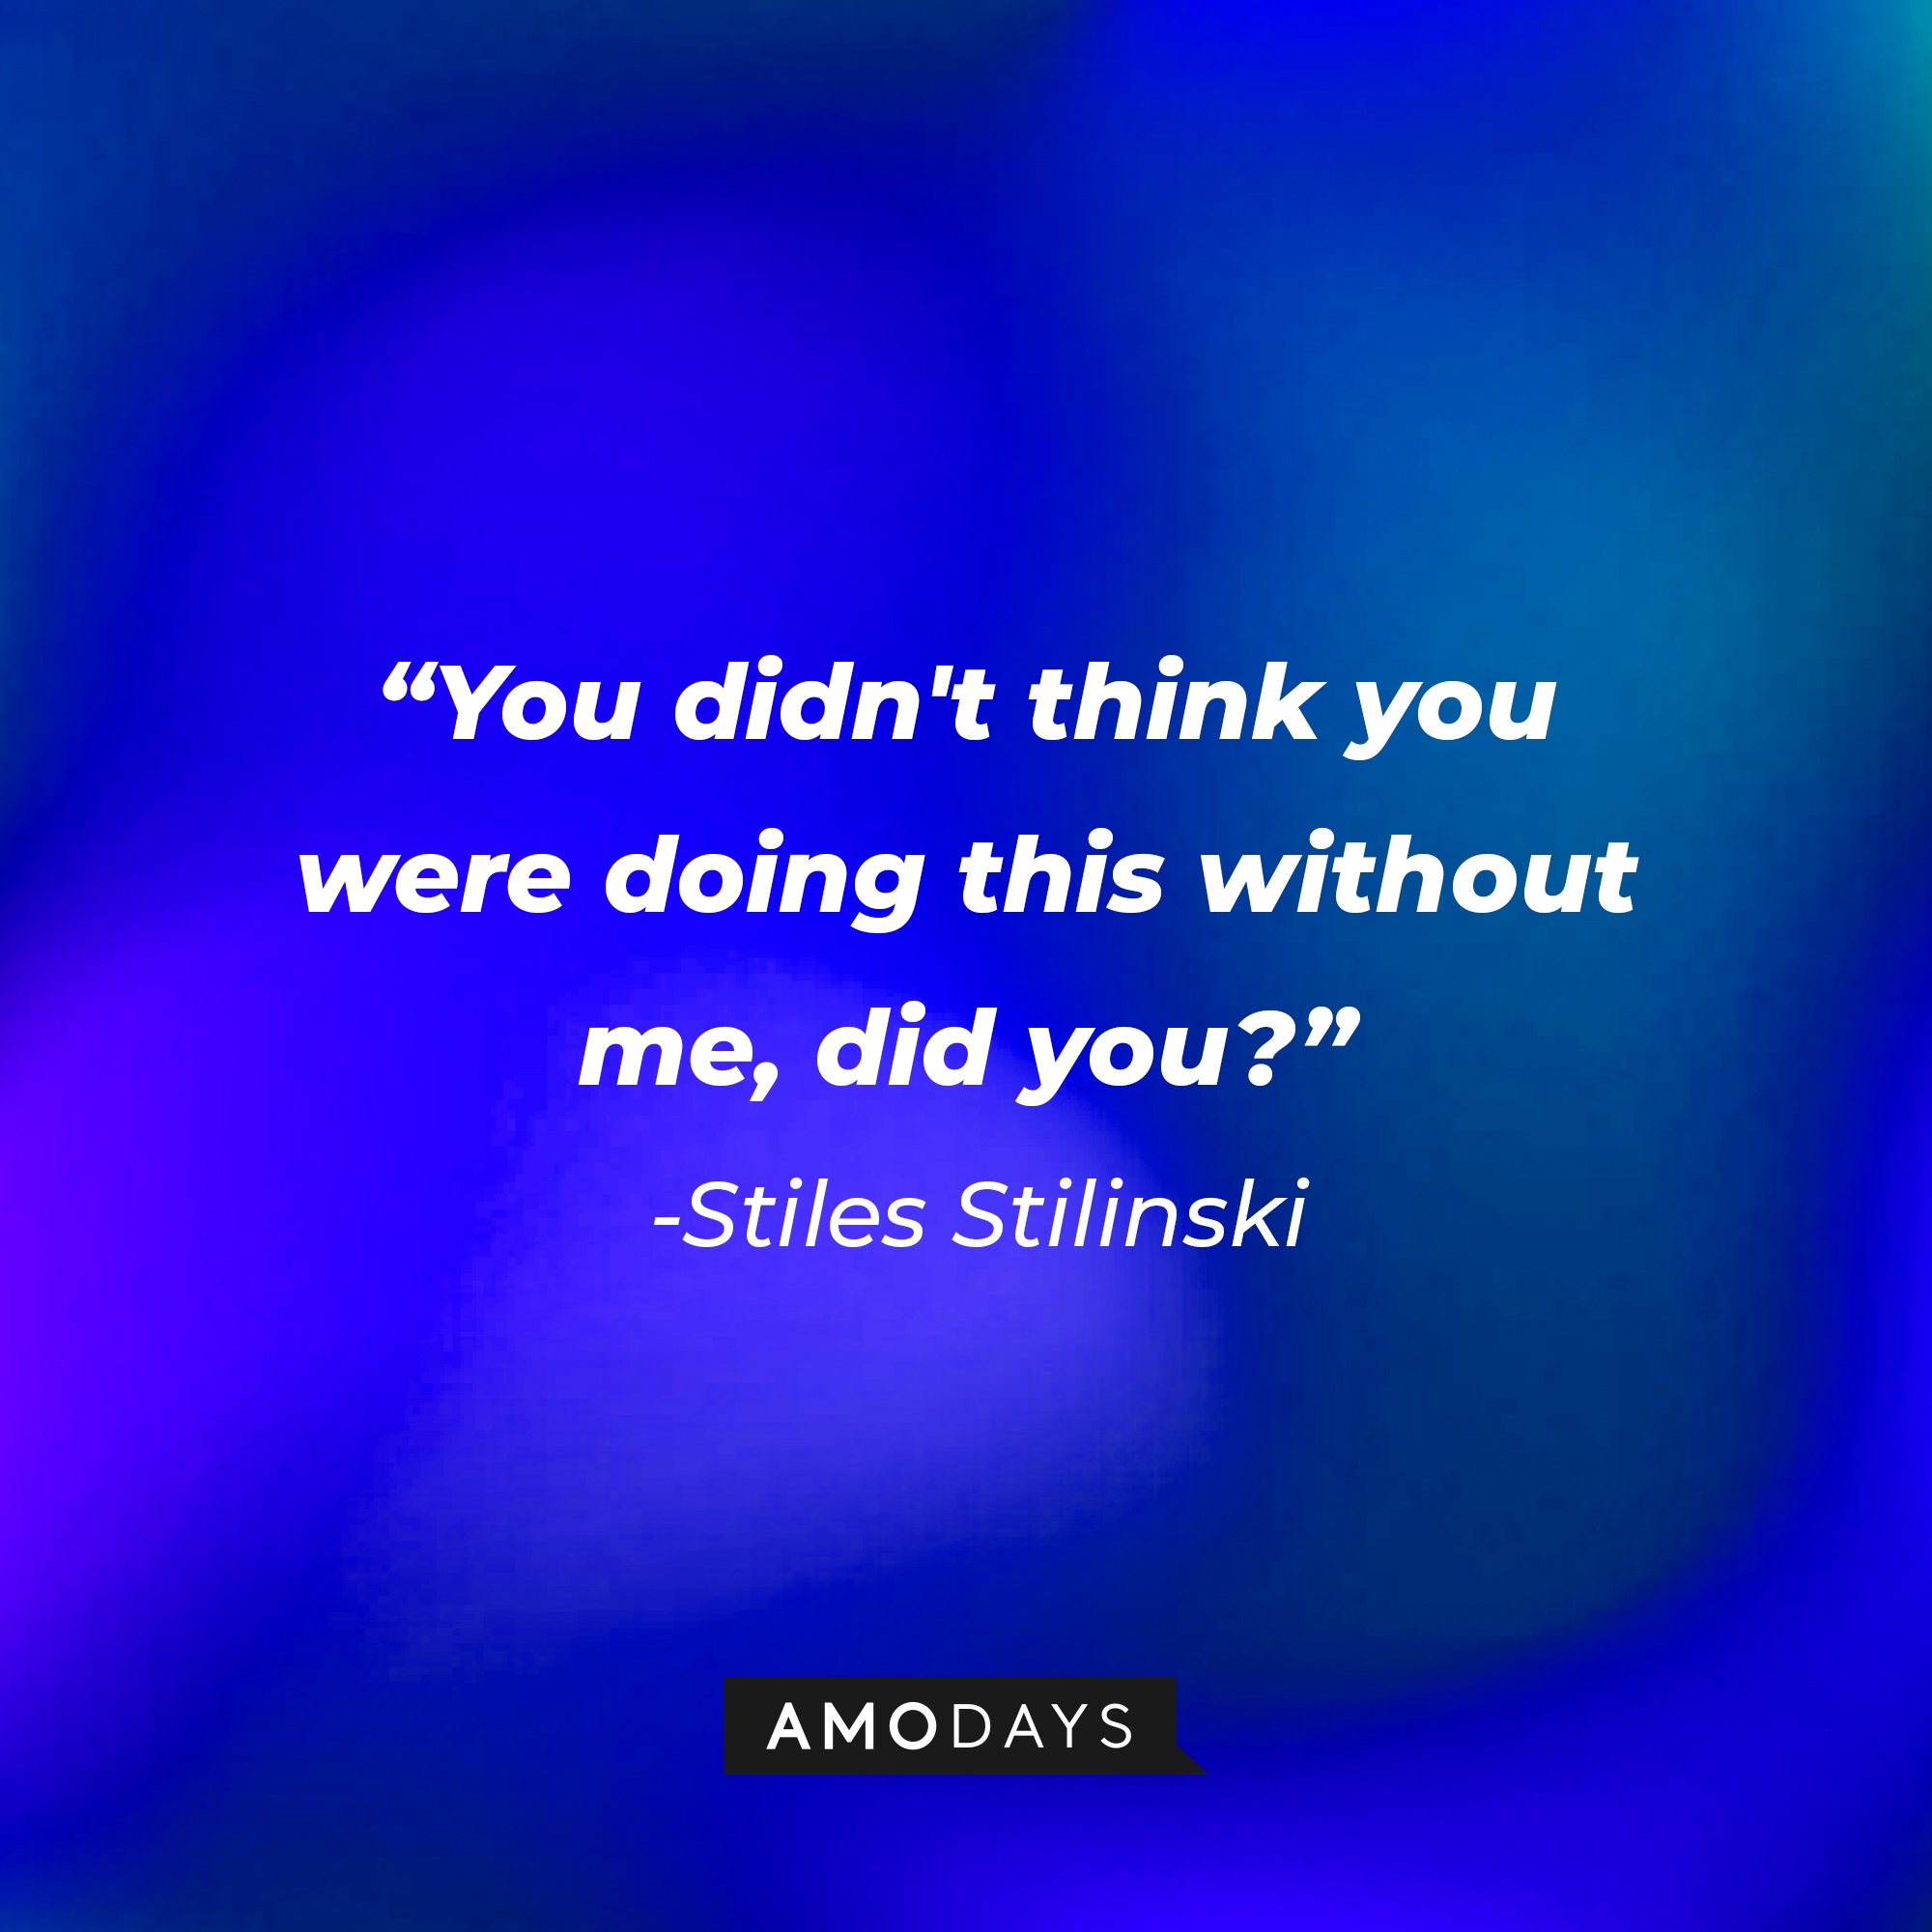 Stiles Stilinski's quote: "You didn't think you were doing this without me, did you?" | Image: AmoDays